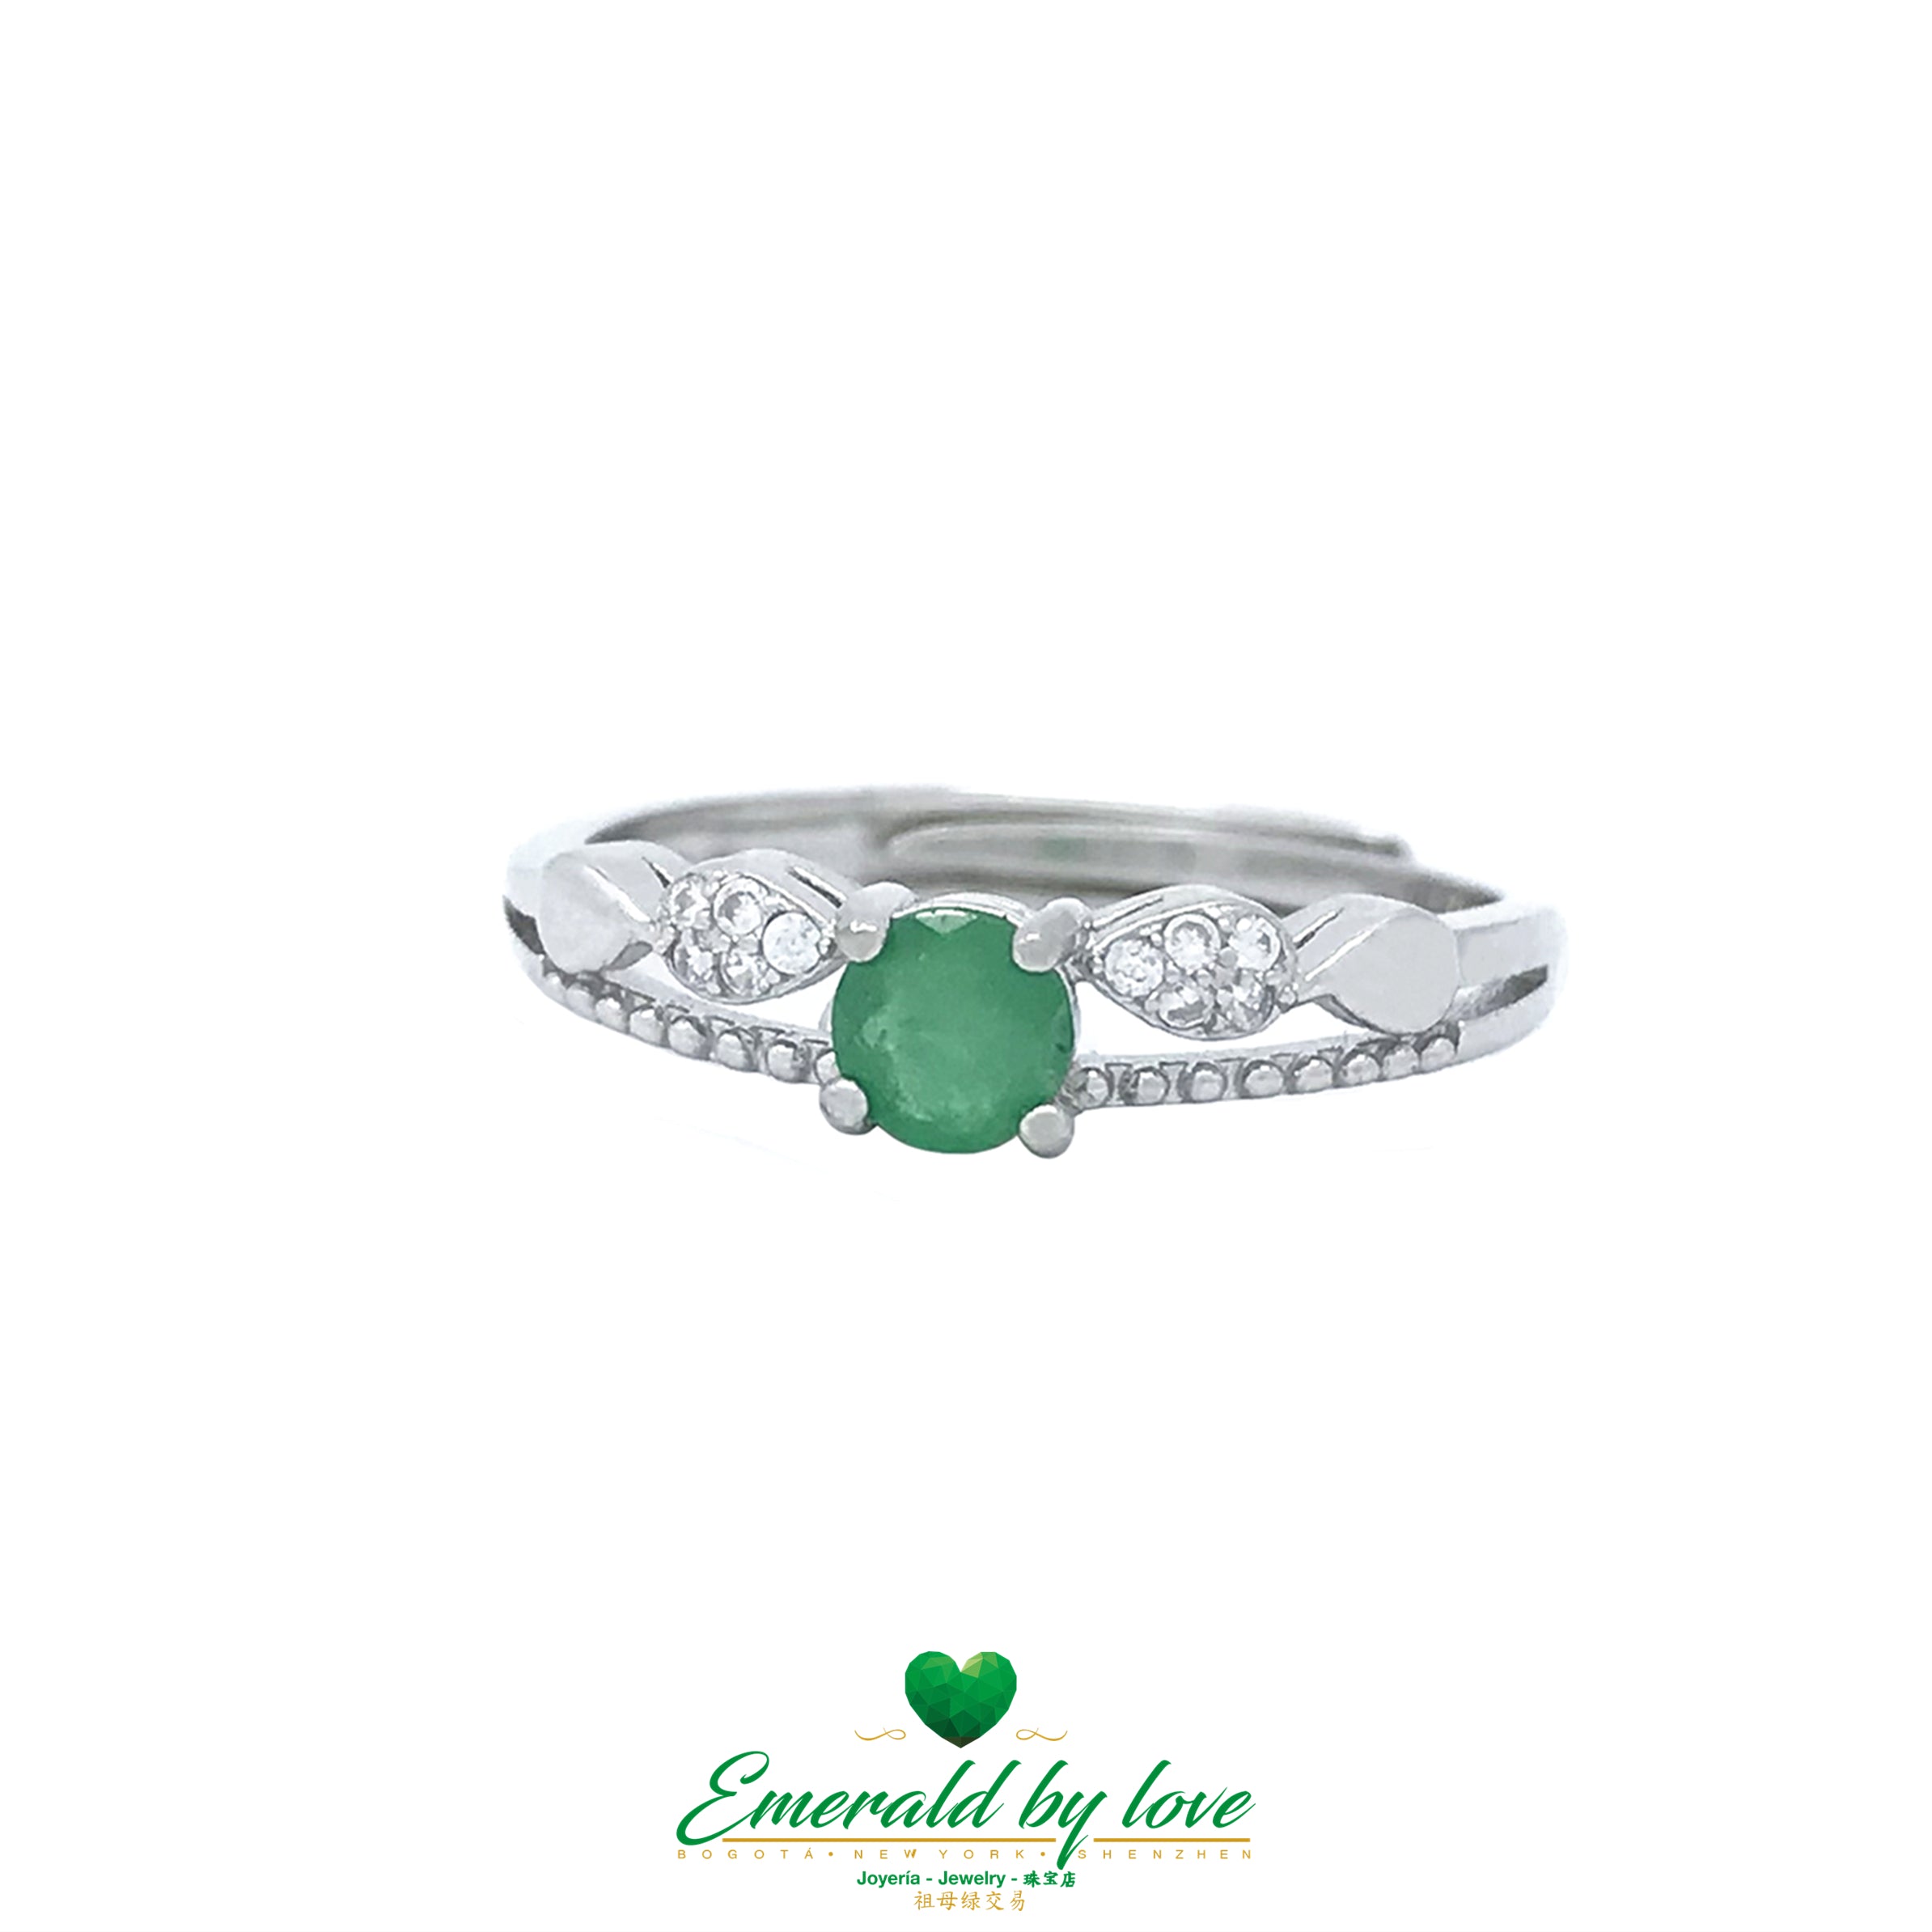 Double-Band Ring with Round Central Emerald and Bow Design in Zirconia